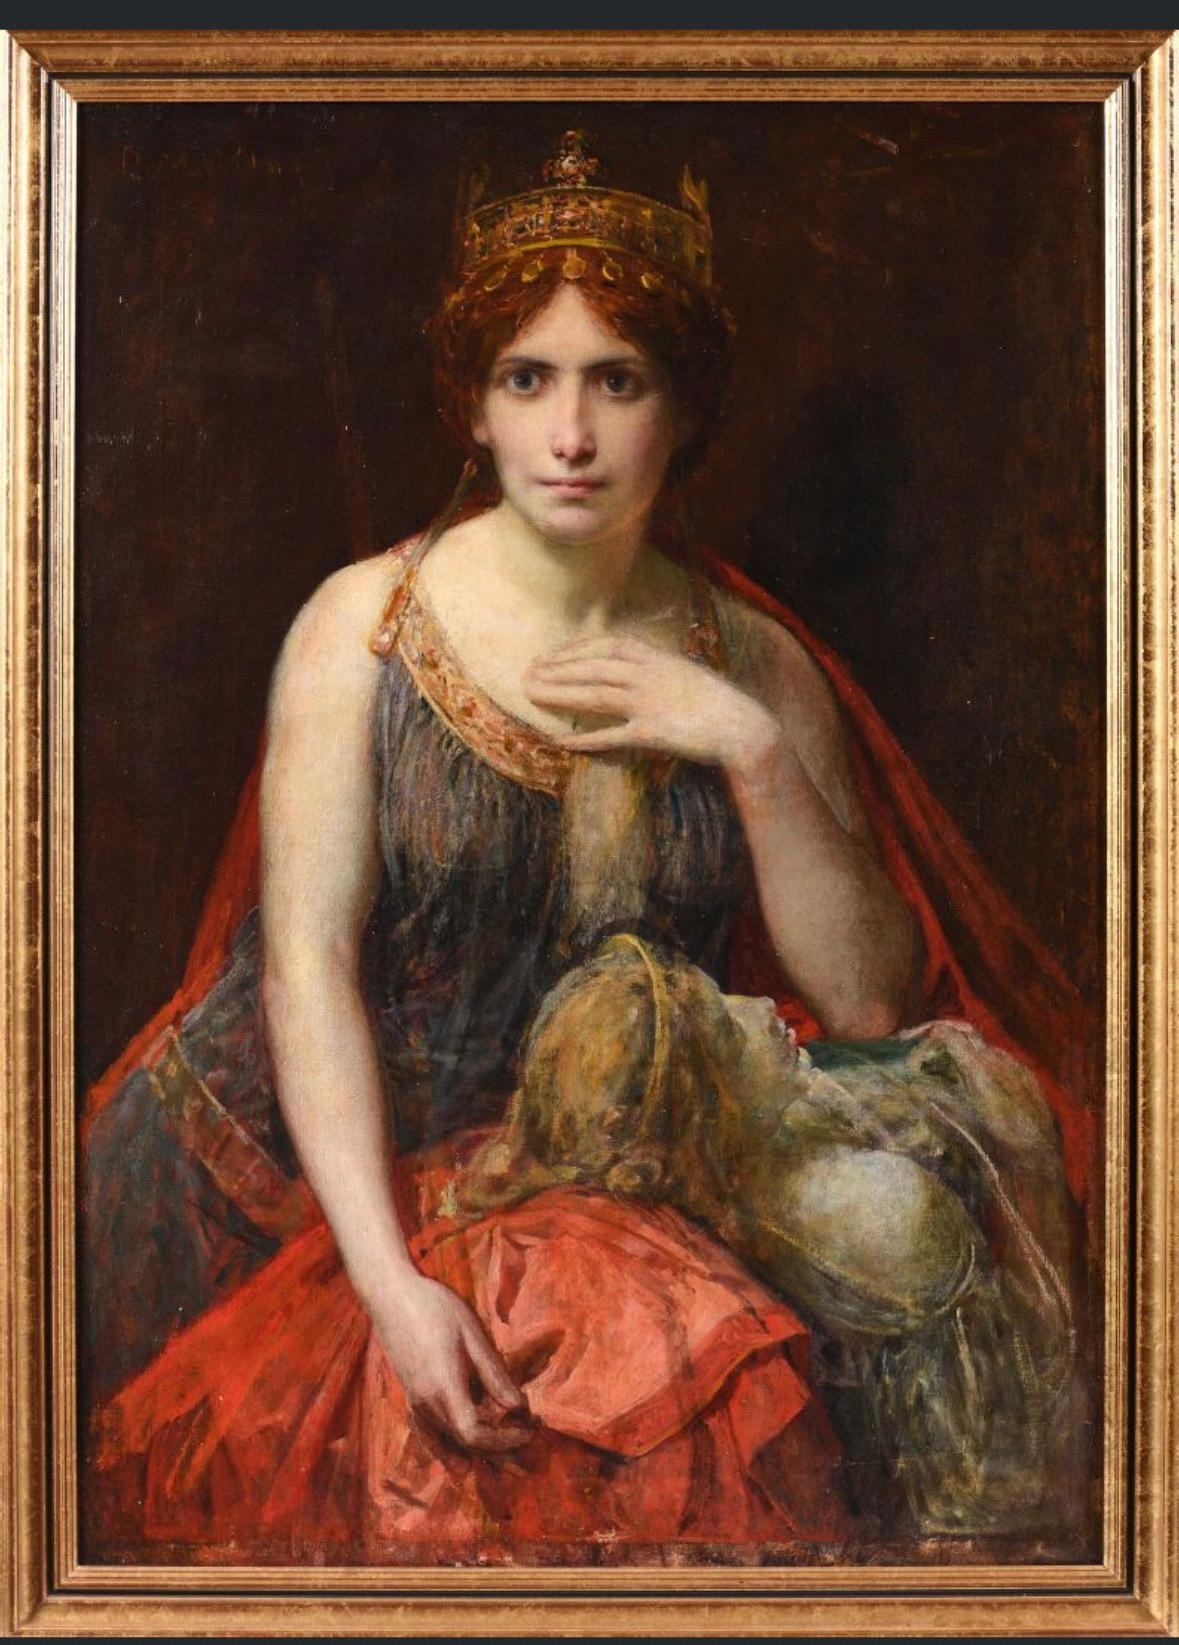 The Queen
by Diogène Ulysse Napoléon Maillart (French, 1840 – 1926) *see notes below
oil painting on canvas, framed
canvas: 42 x 30 inches
framed: 45 x 33 inches
condition: overall very good, well presented and ready to hang
provenance: private